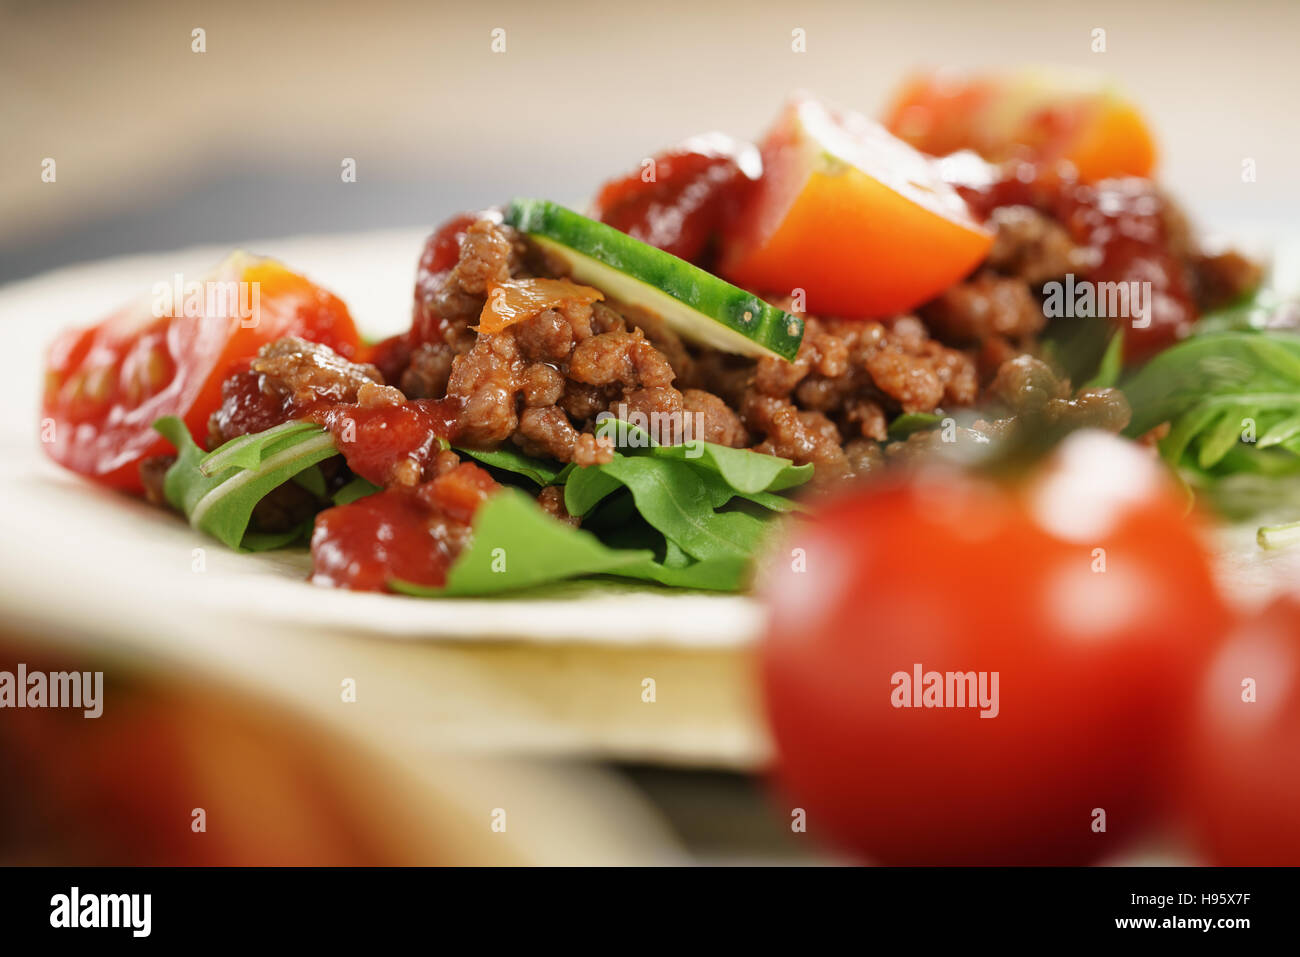 open tortilla with beef, frillice and vegetables Stock Photo